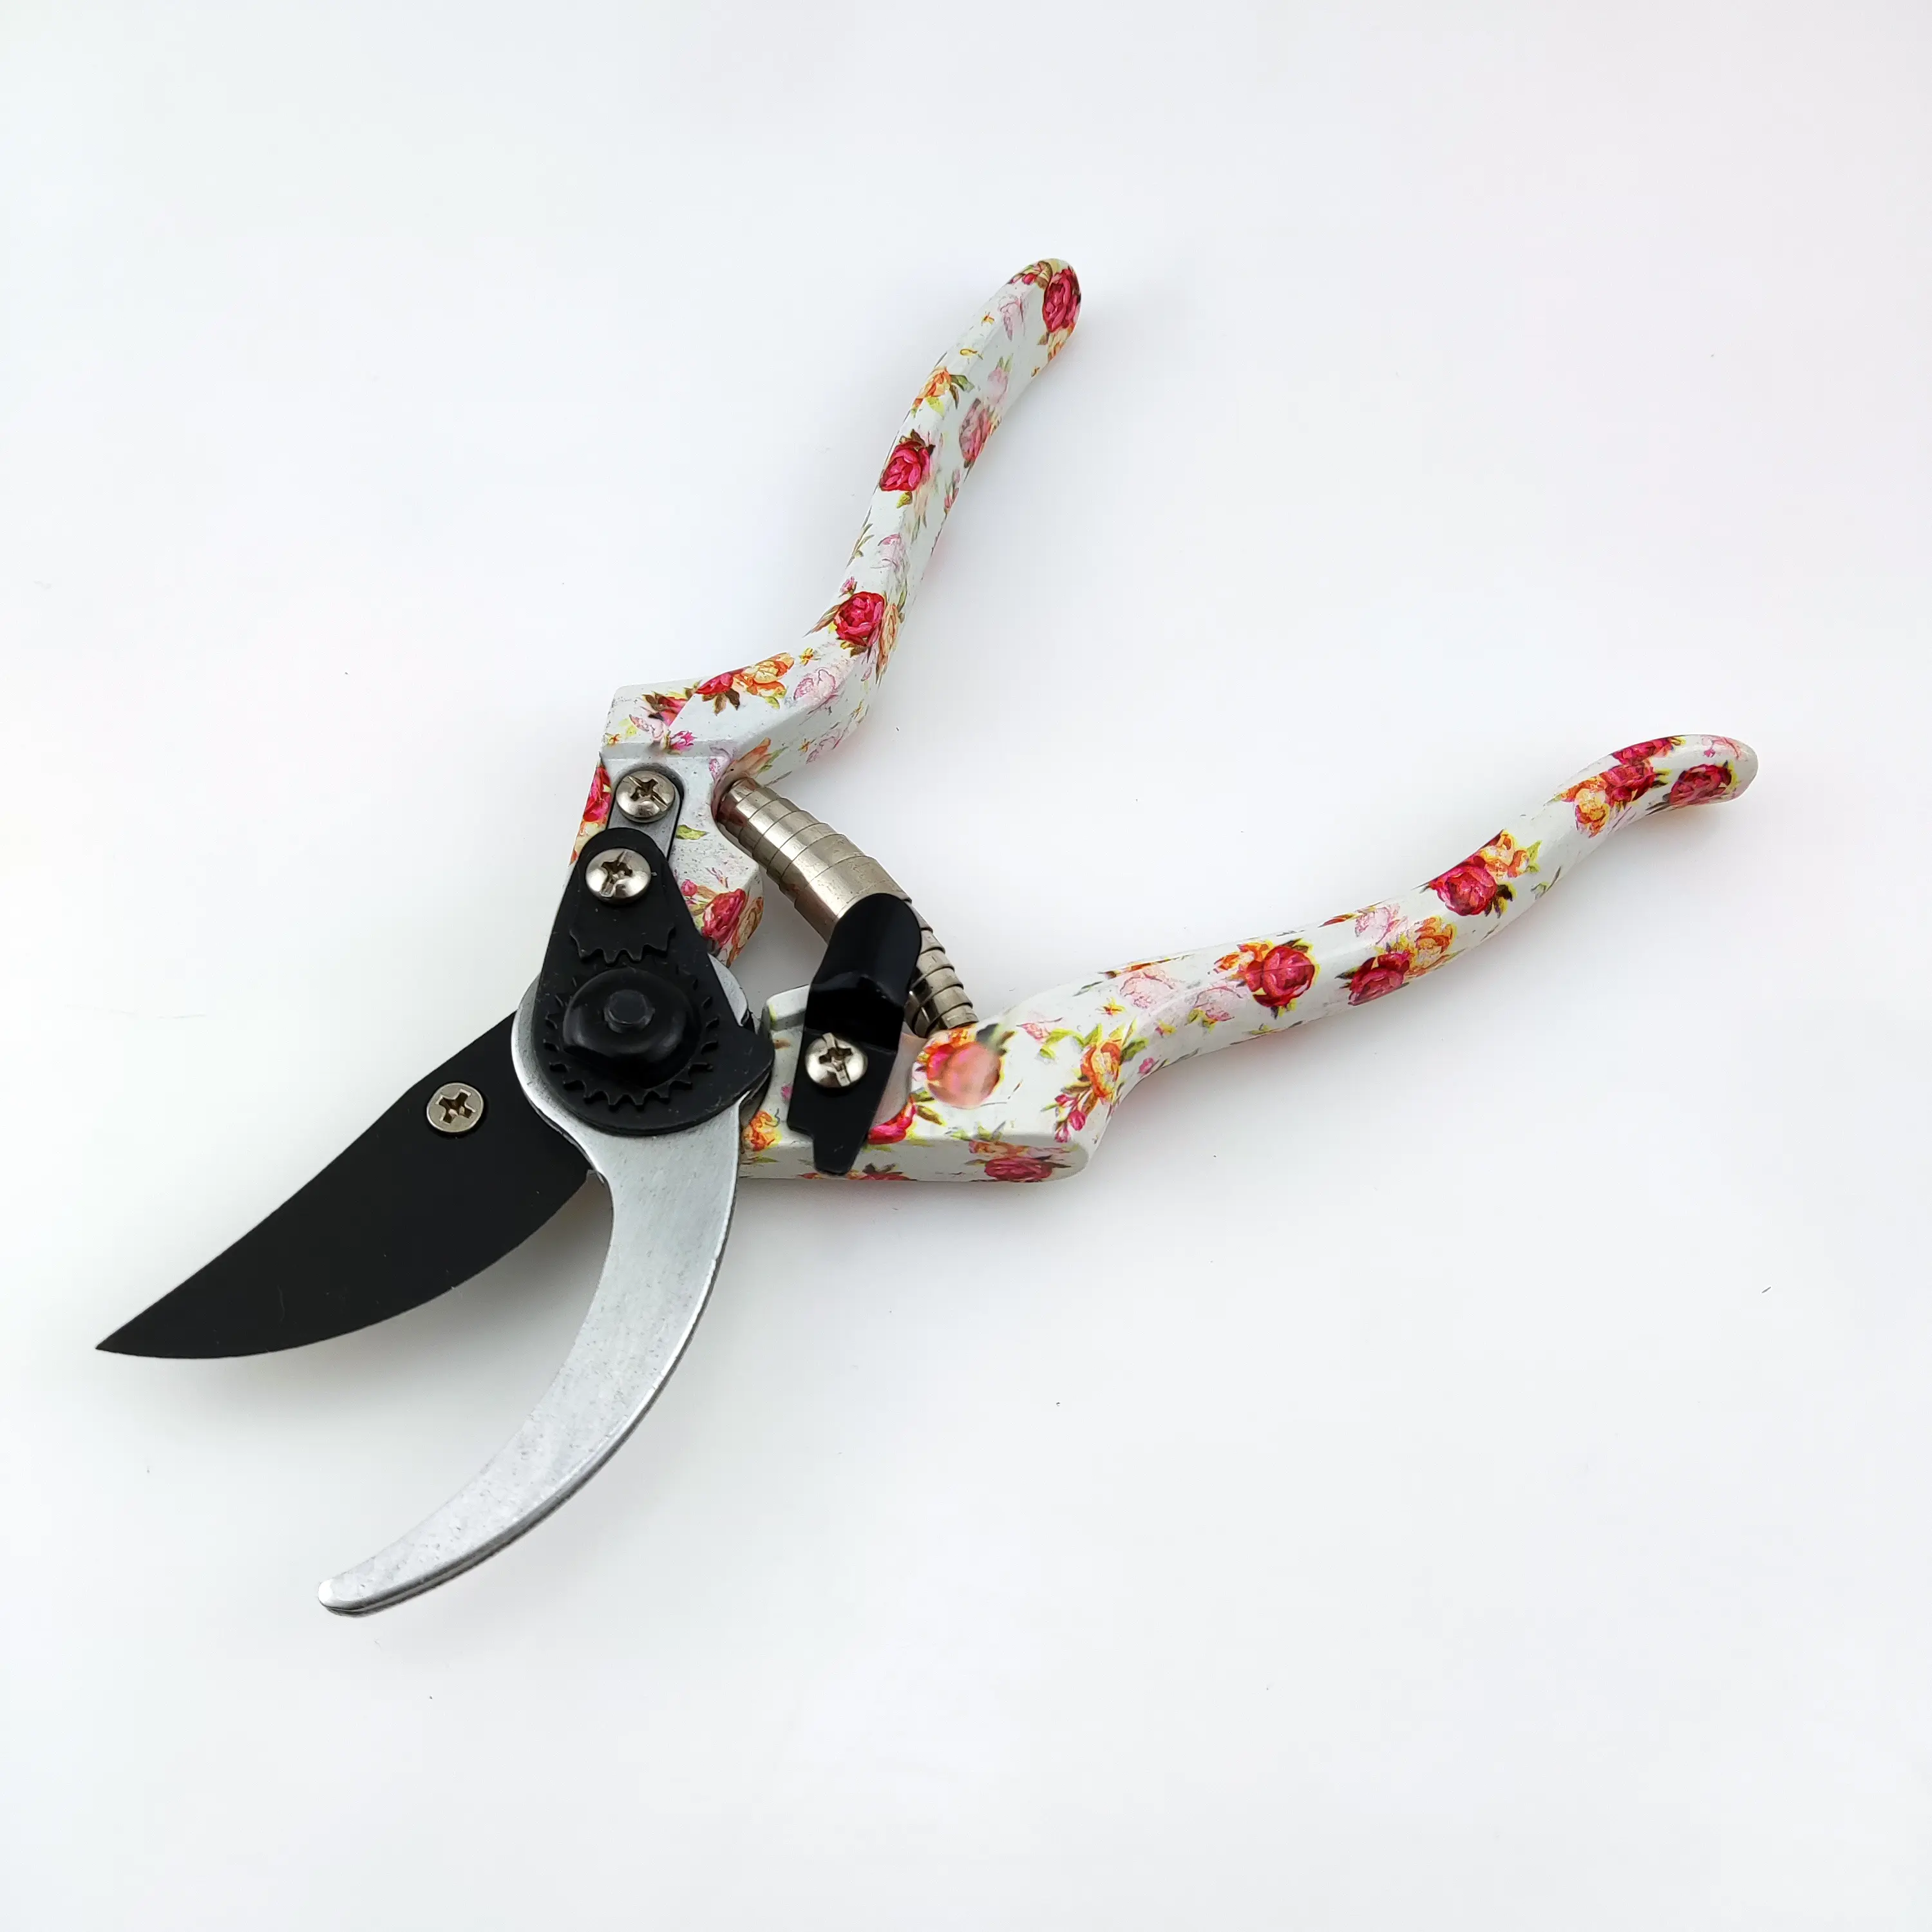 Lady Manual Craft Gift Design Floral Printing Garden Tree Pruning Shears Tree Trimming Scissors